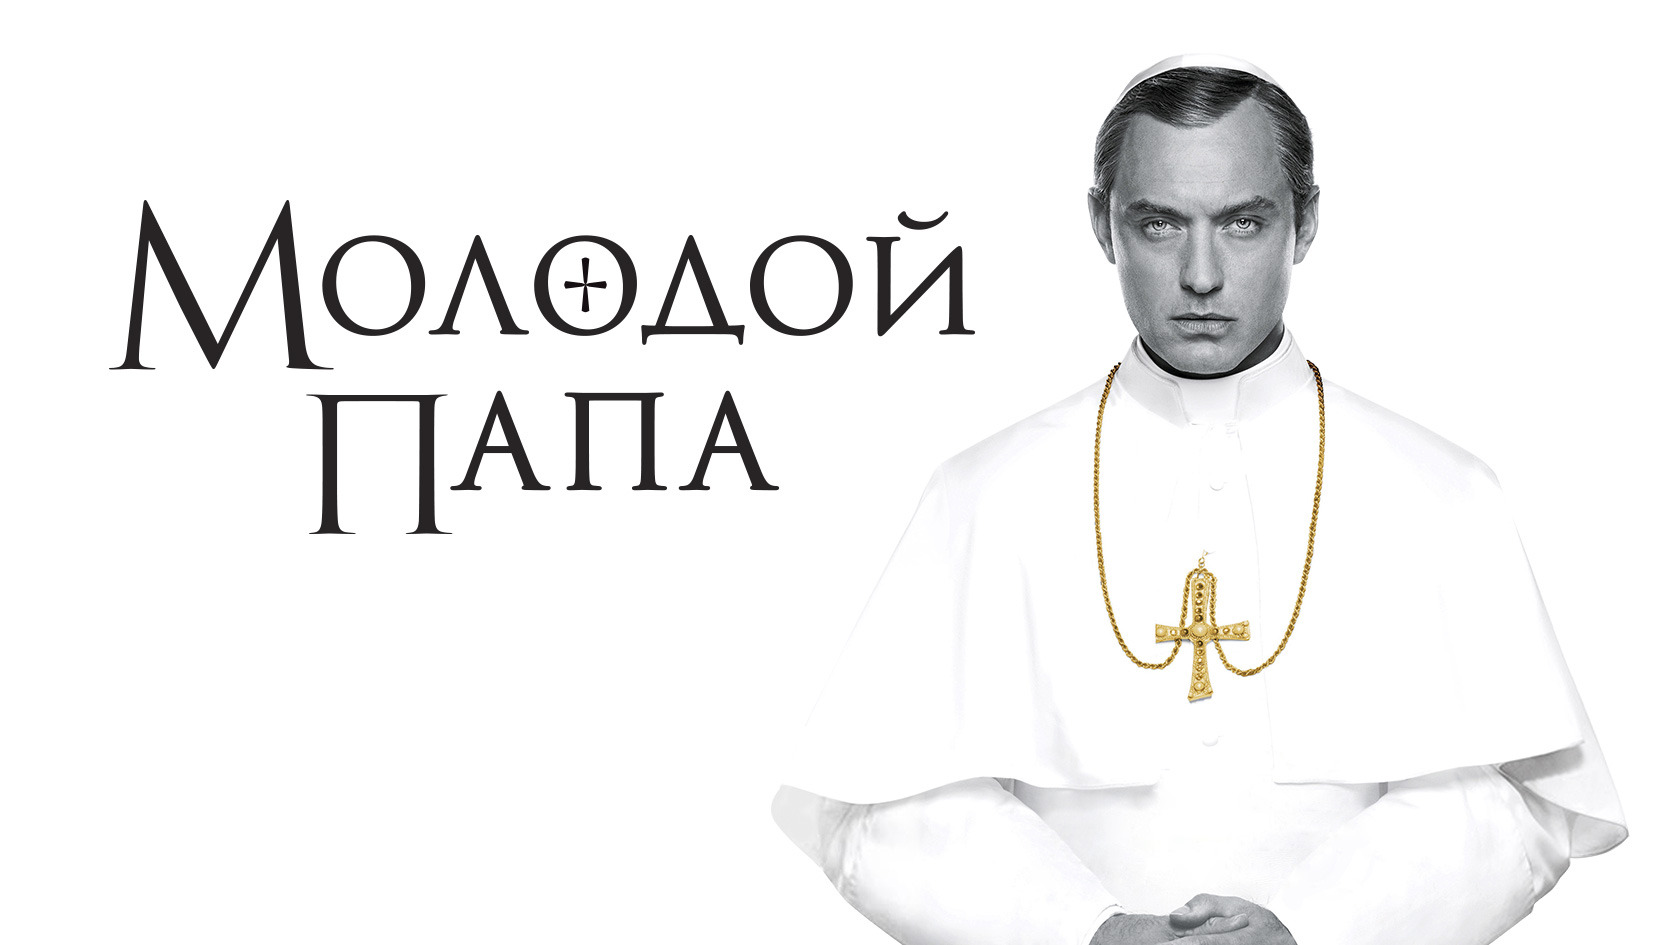 Show The Young Pope